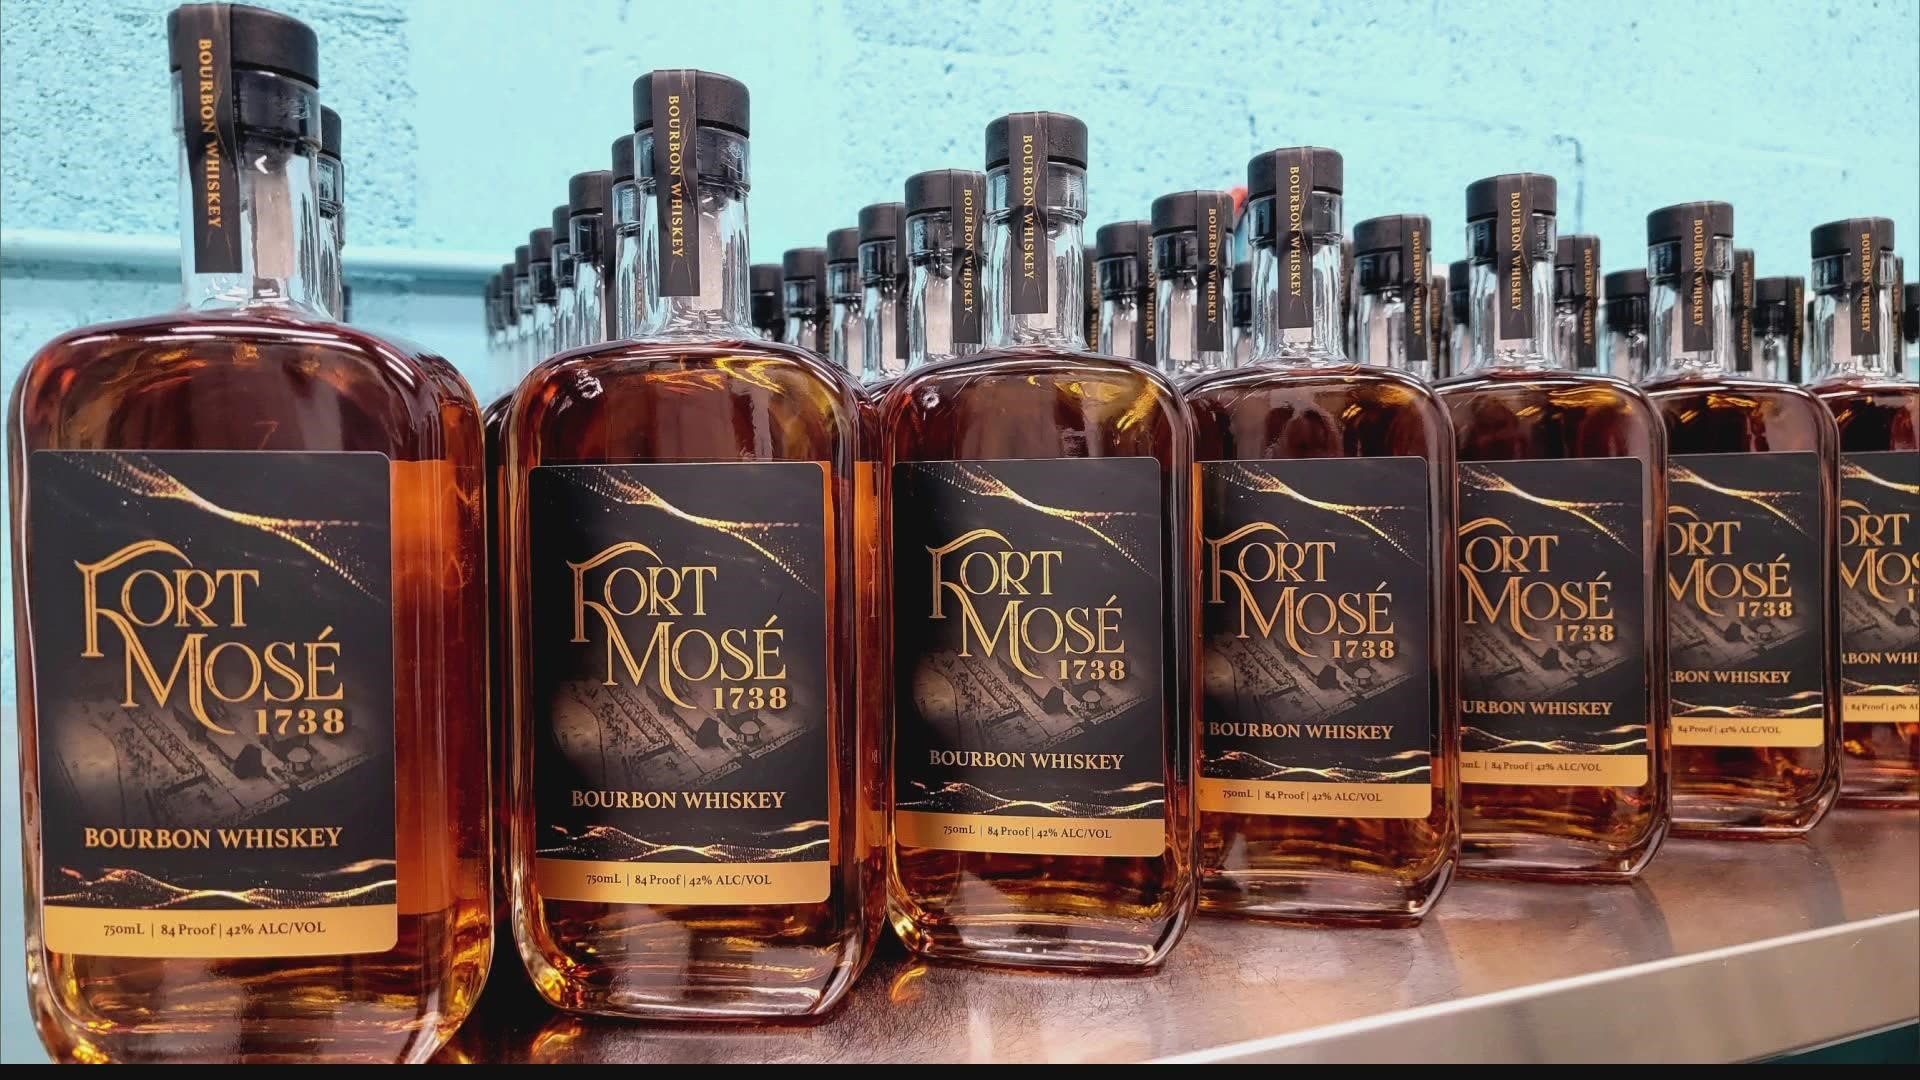 For the next year $1 dollar of every bottle sold will be donated to Fort Mose Historic State Park.